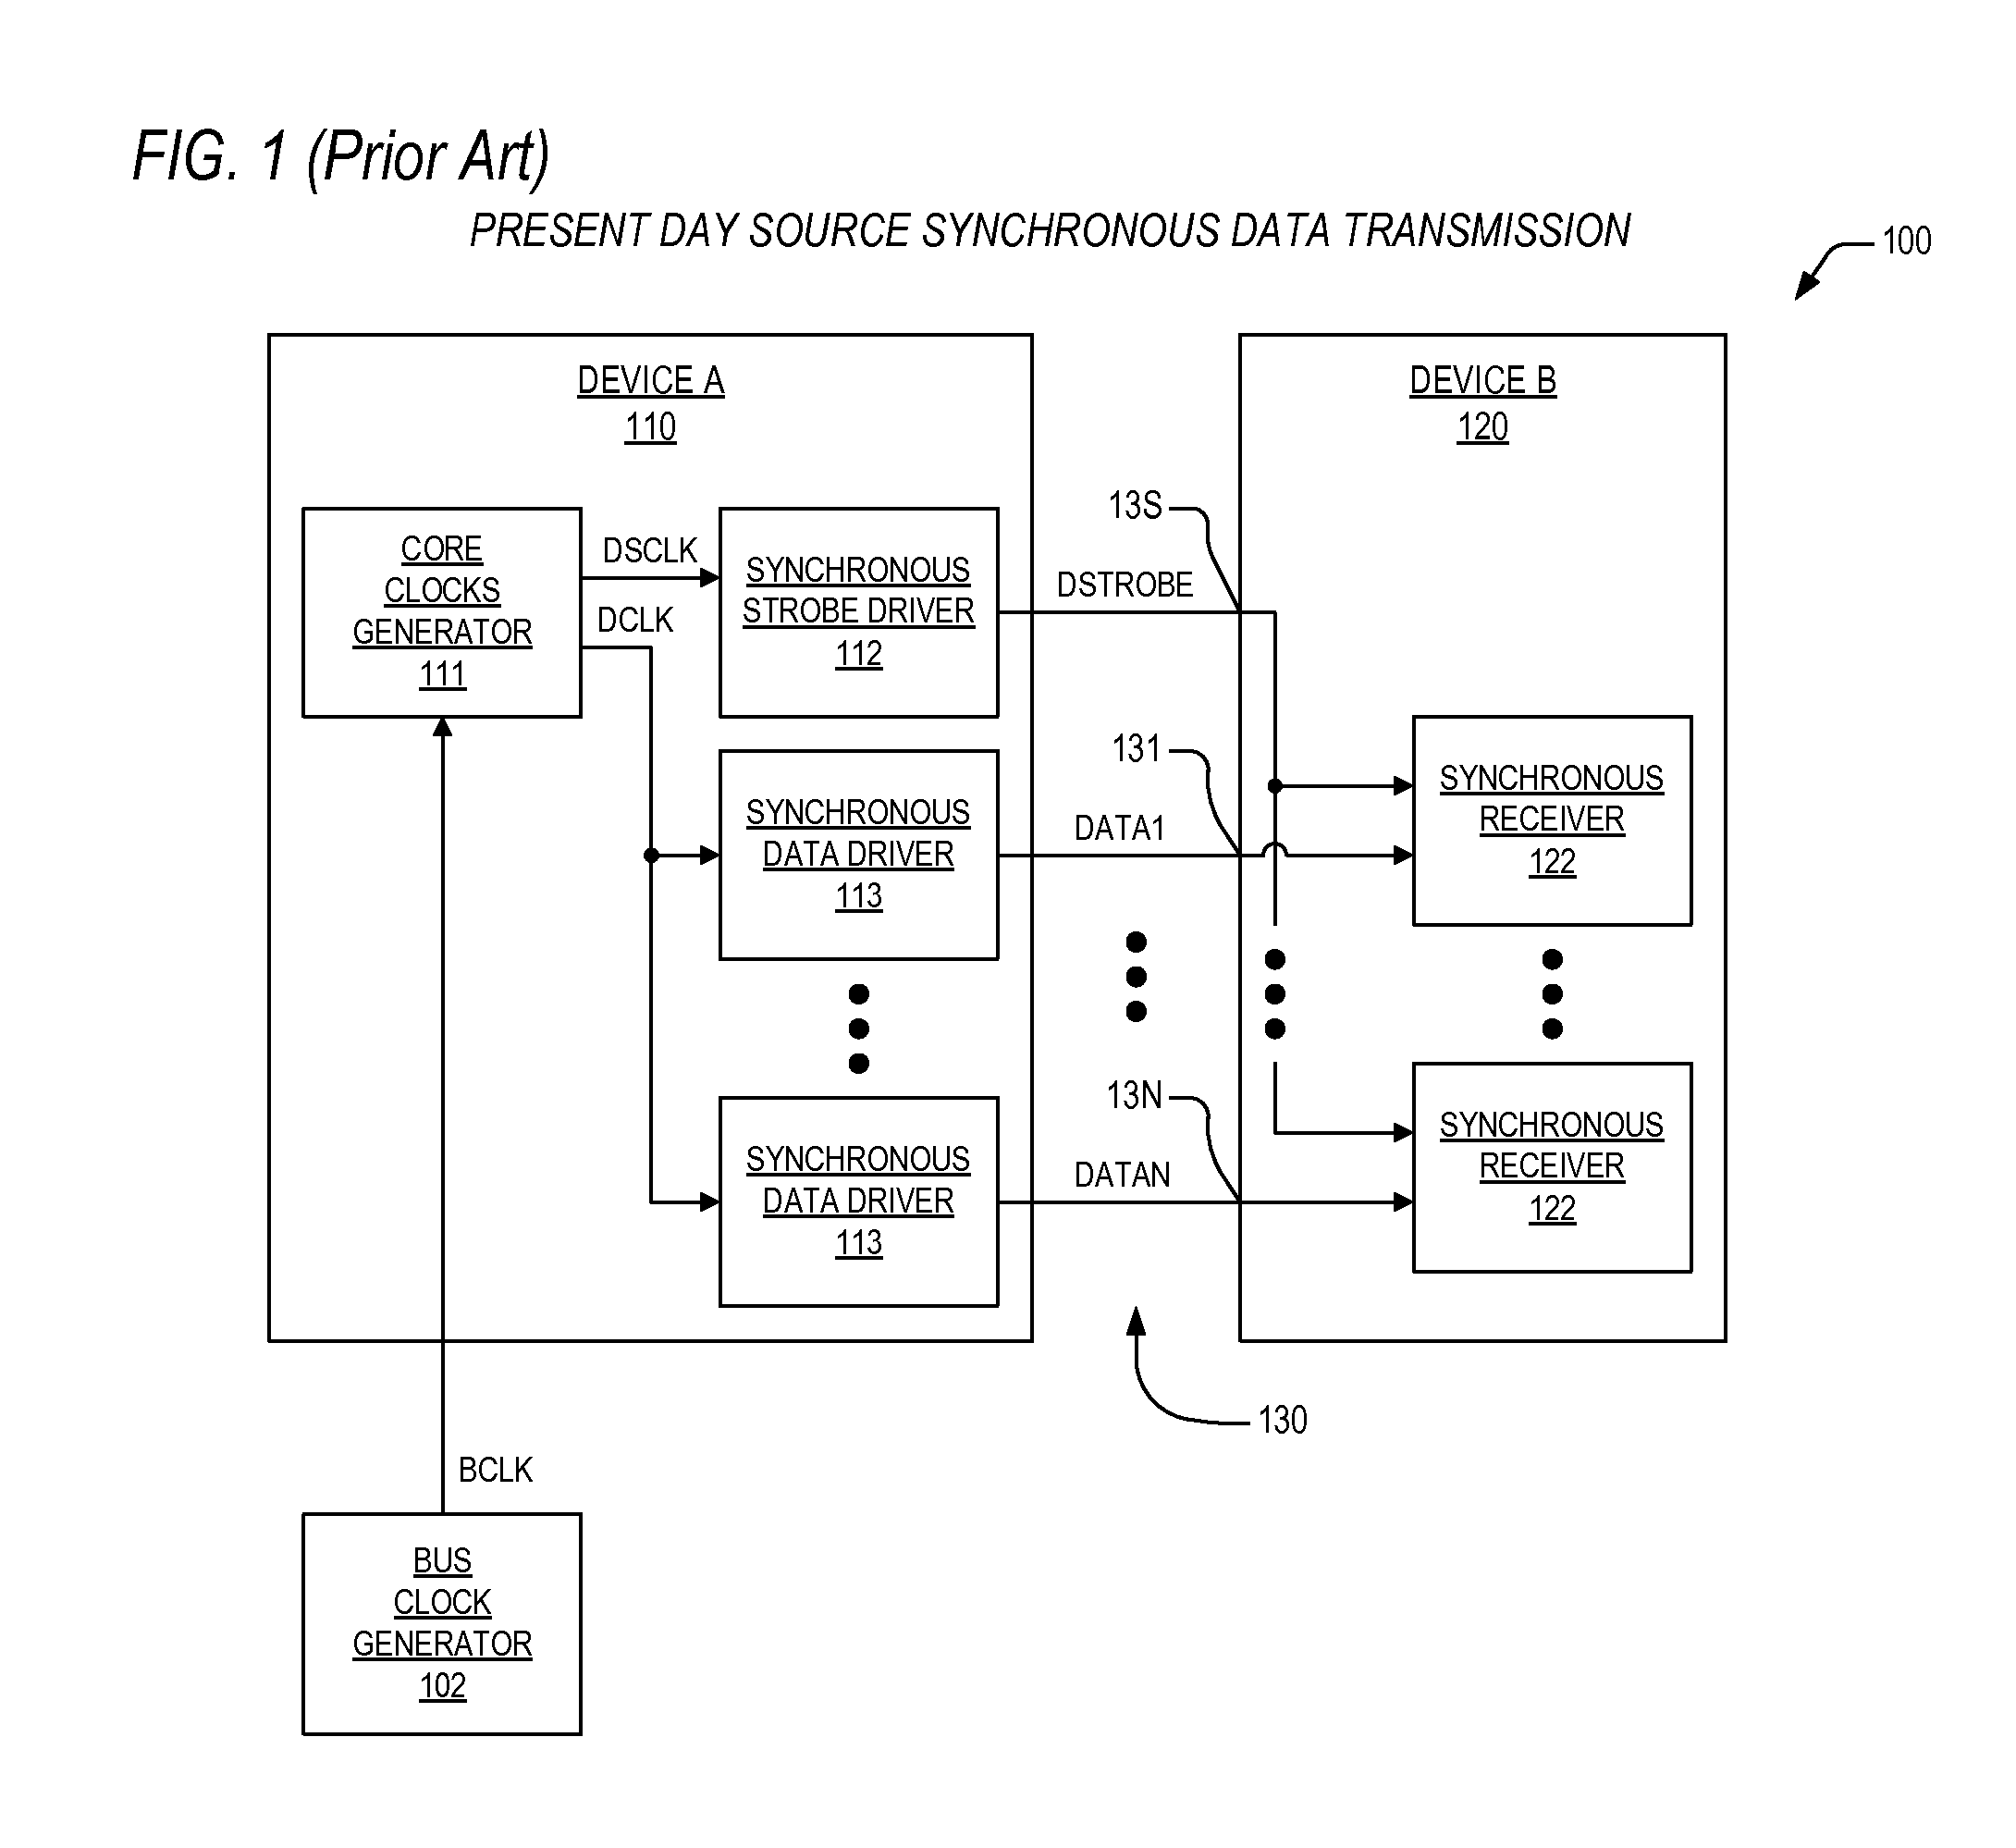 Programmable mechanism for delayed synchronous data reception